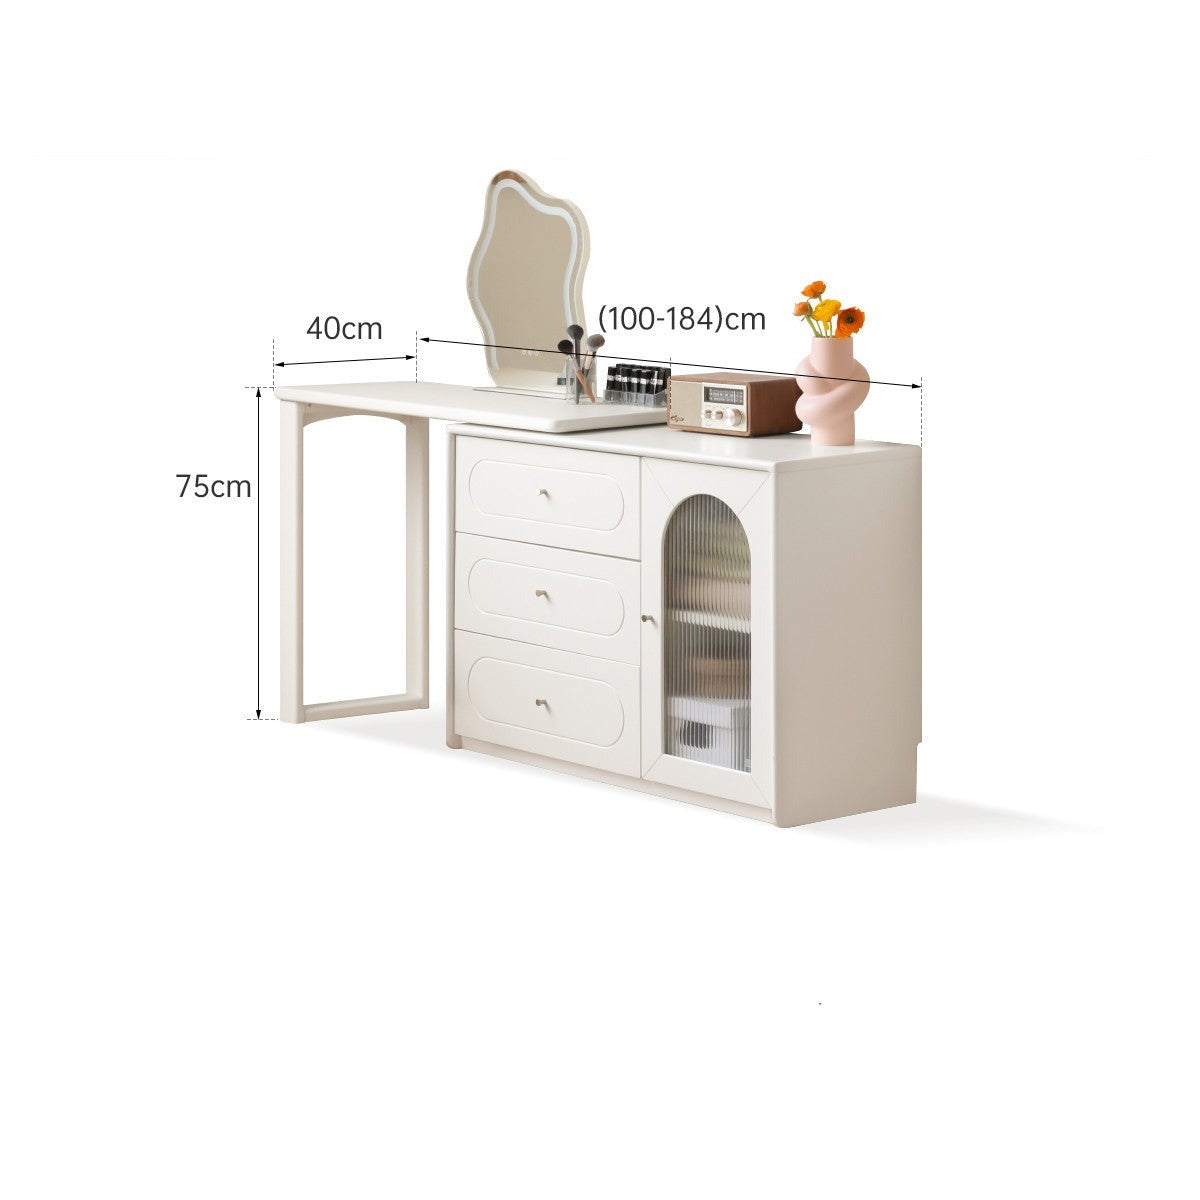 Poplar solid wood dressing table and cabinet integrated French cream style retractable -